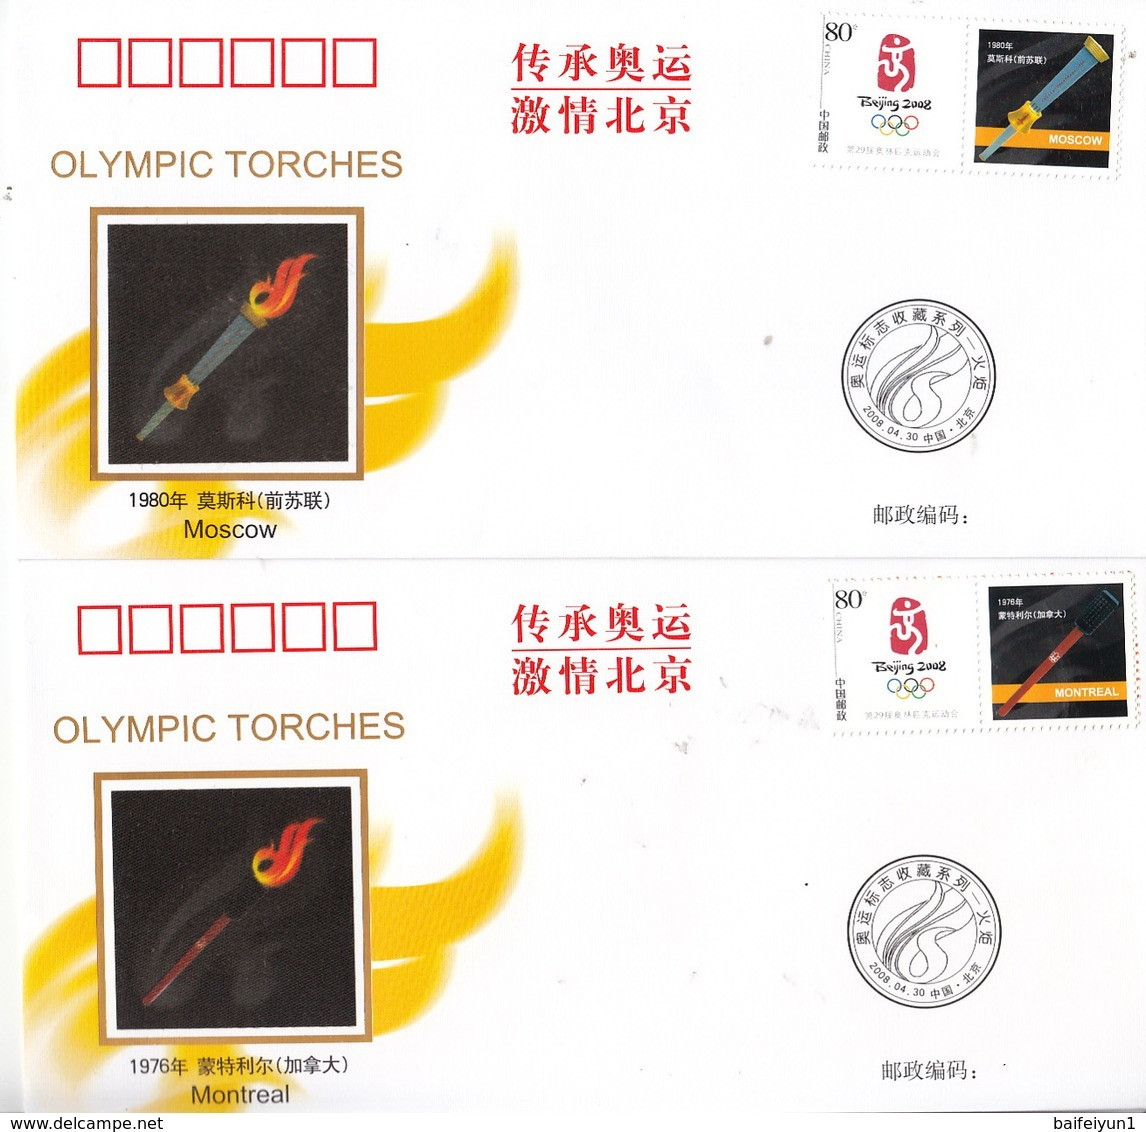 China 2008 Beijing Bearing Olympic Passion(Olympic torch)-Commemorative covers(17 sets)